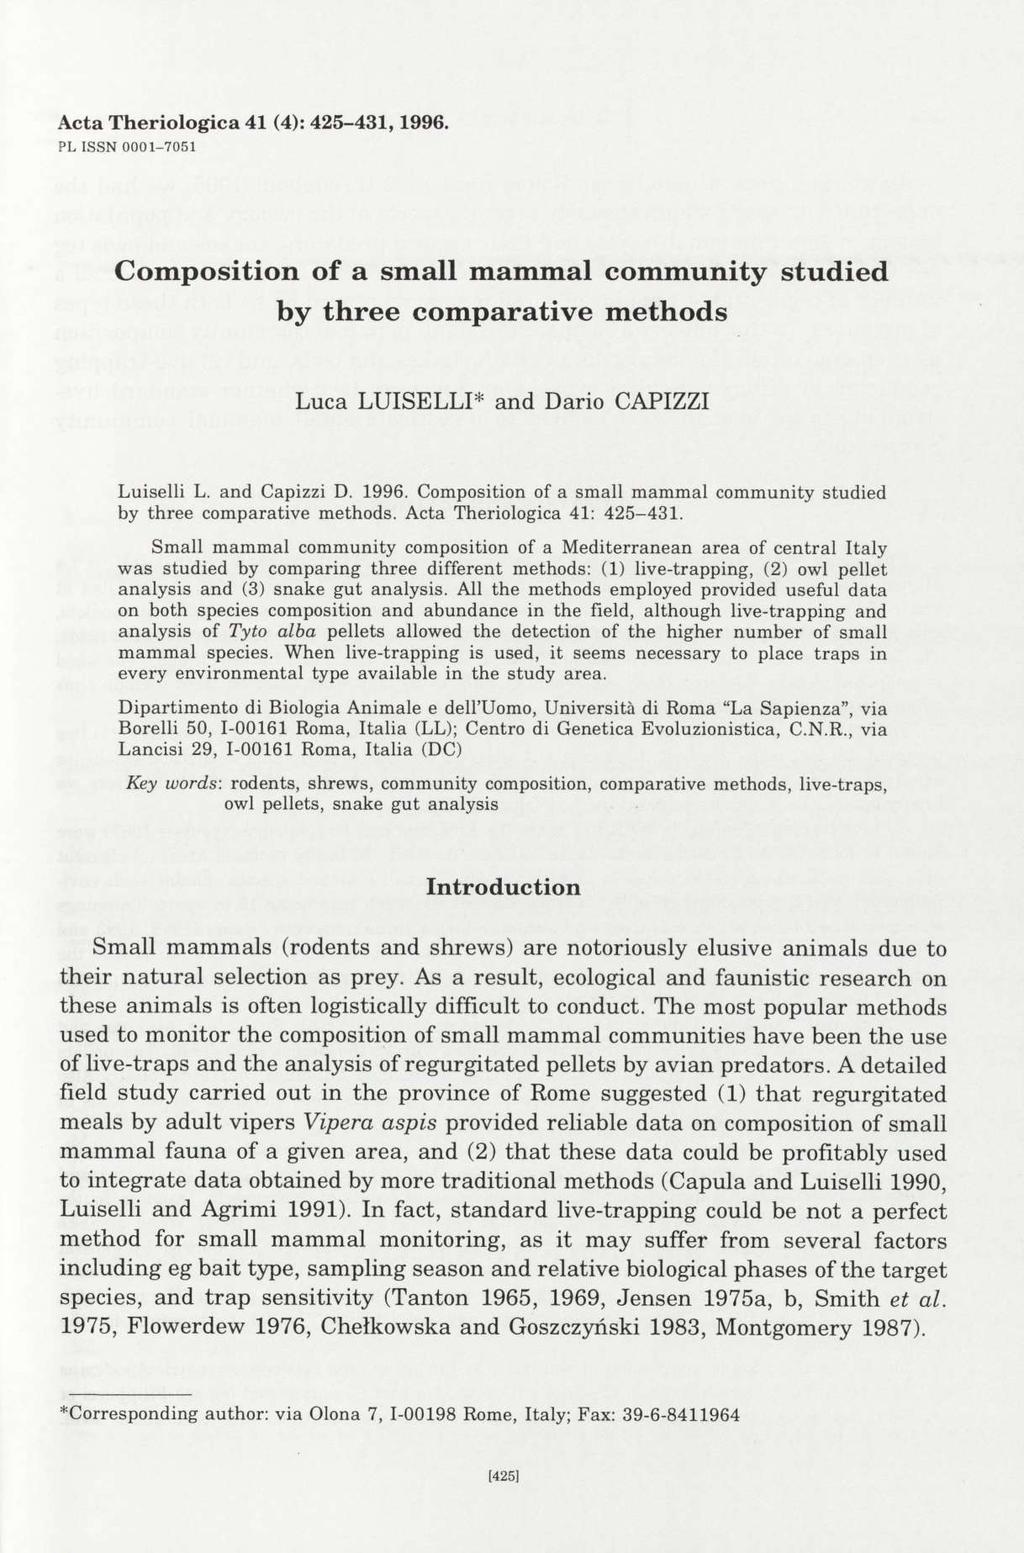 Acta Theriologica 41 (4): 425-431, 1996. PL ISSN 0001-7051 Composition of a small mammal community studied by three comparative methods Luca LUISELLI* and Dario CAPIZZI Luiselli L. and Capizzi D.